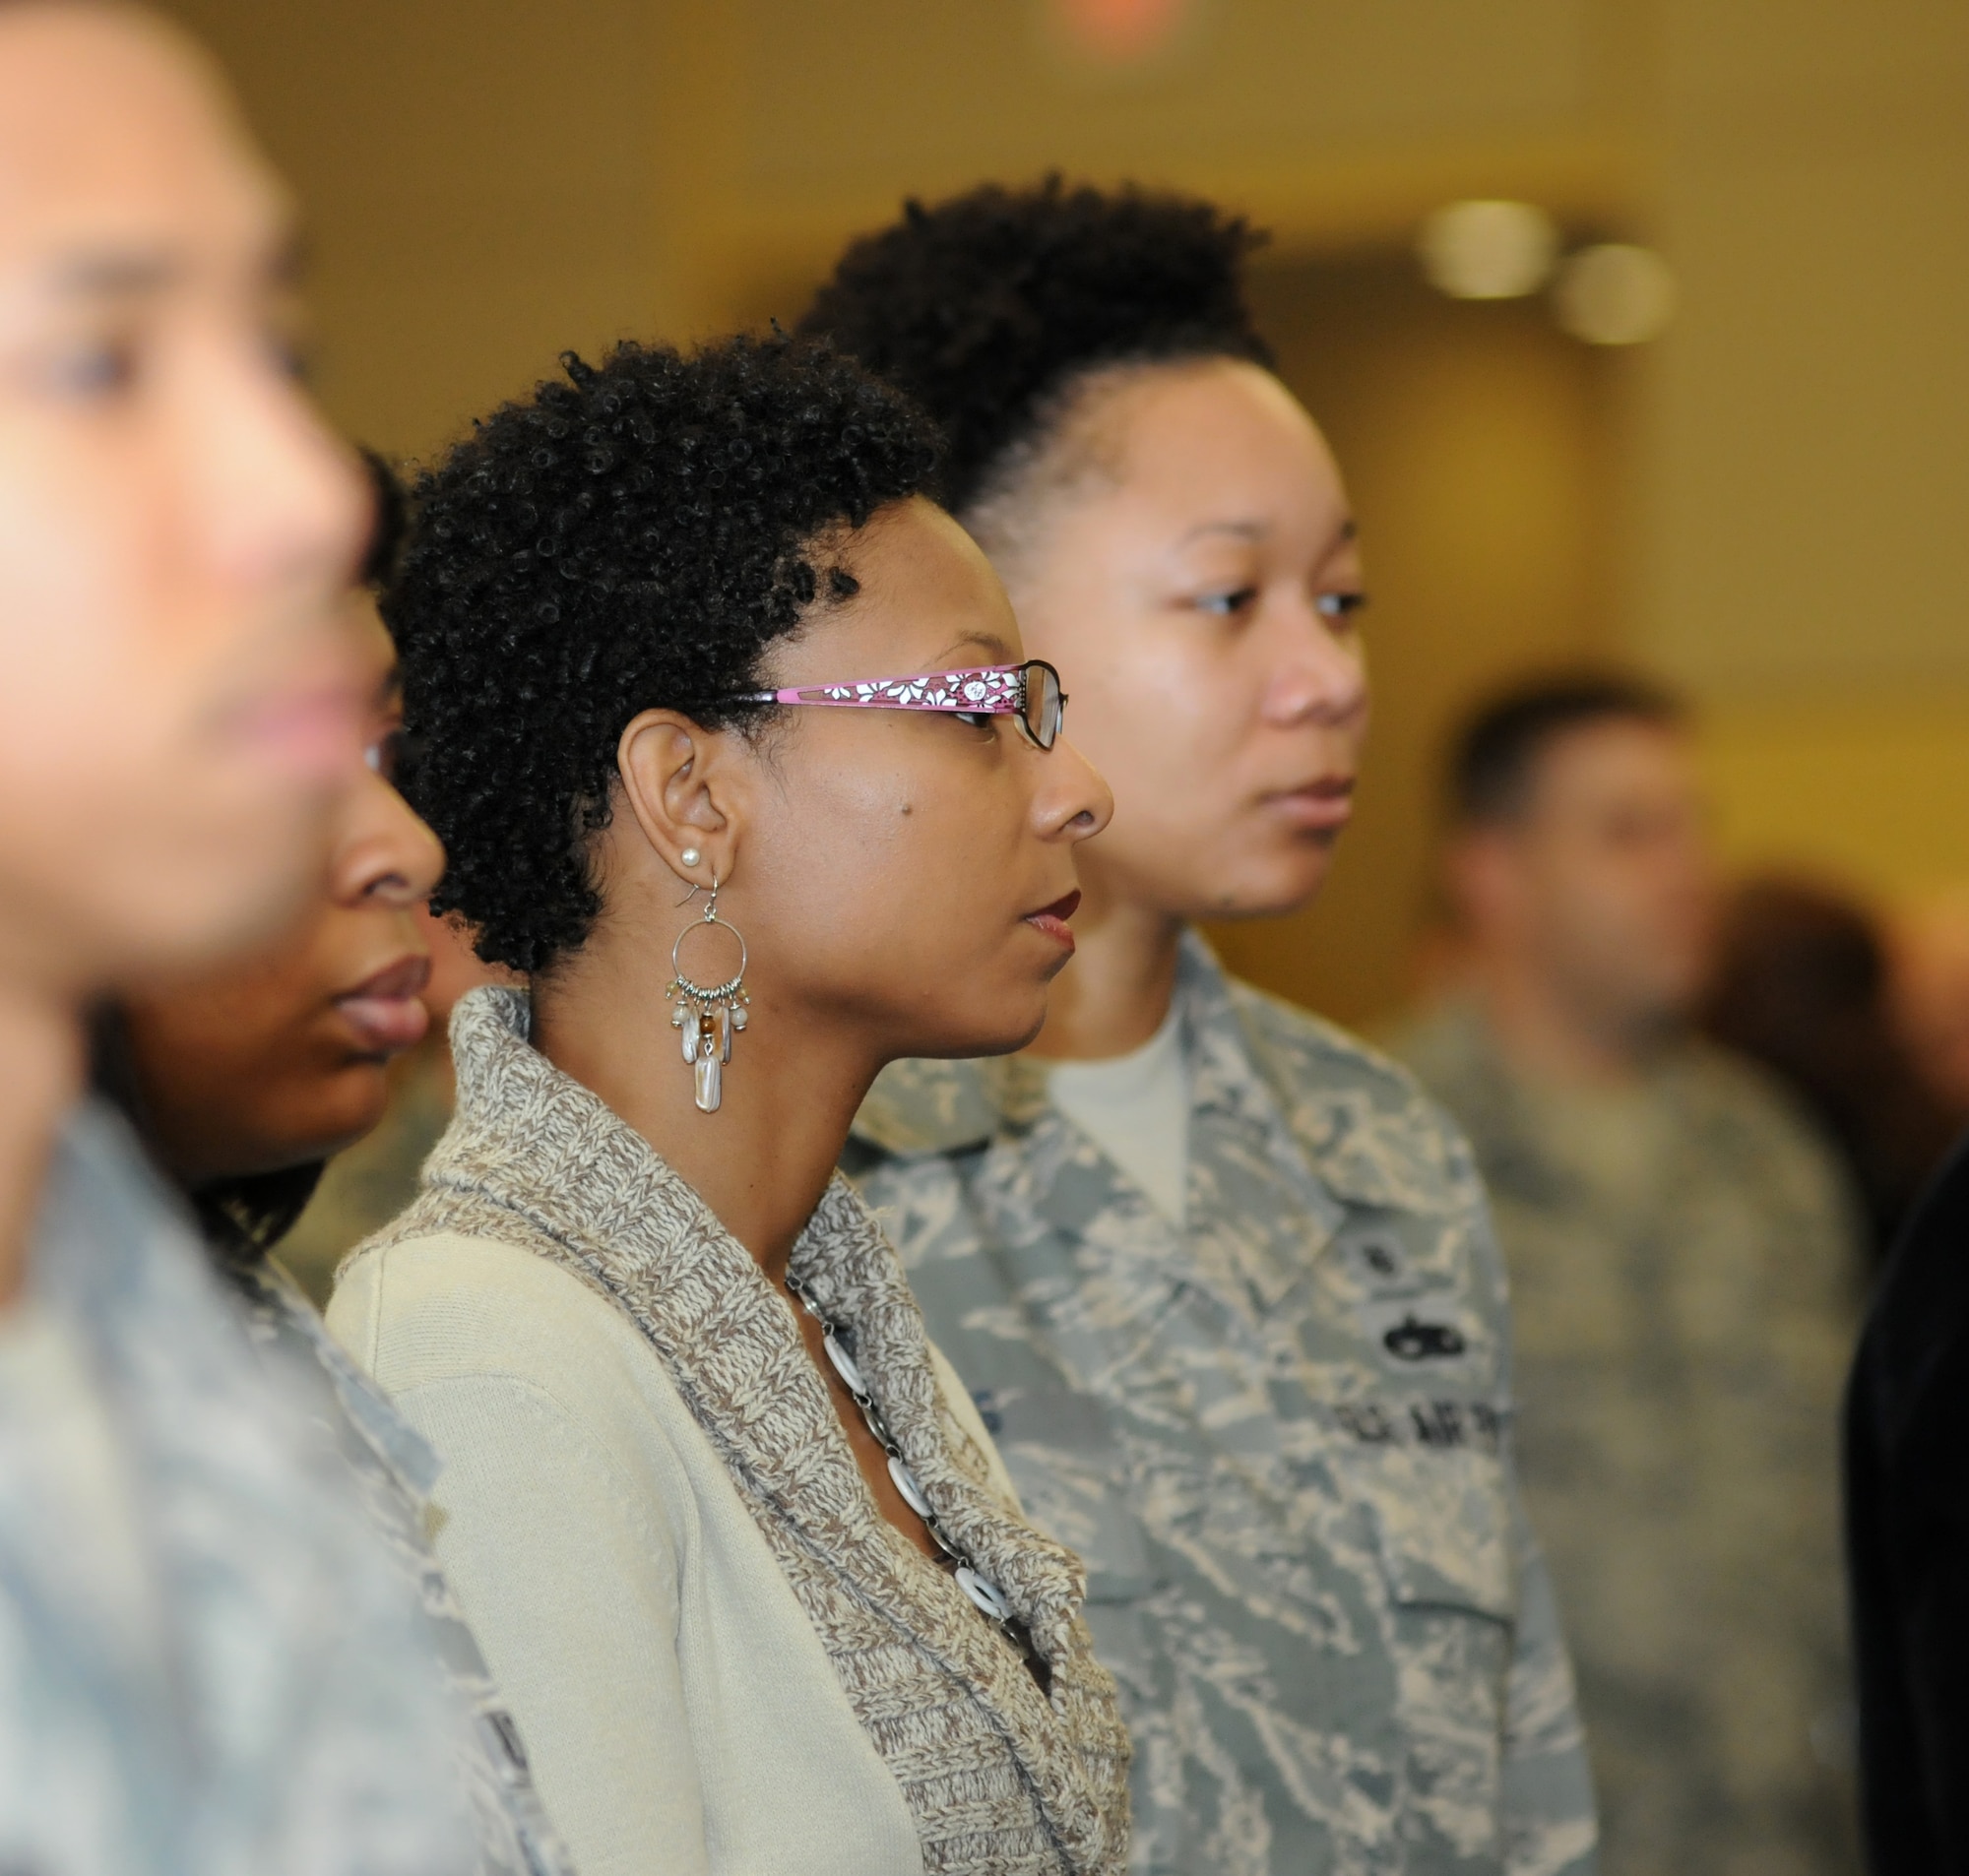 Antoinette Vinson and Staff Sgt. Andrea Jones, 81st Medical Support Squadron, stand in the audience as the colors are posted during the Black History Month luncheon, Feb. 2, 2012, at the Bay Breeze Event Center, Keesler Air Force Base, Miss.  The luncheon was hosted by the African American Heritage Committee and the guest speaker for the event was Sally-Ann Roberts.  (U.S. Air Force photo by Kemberly Groue)